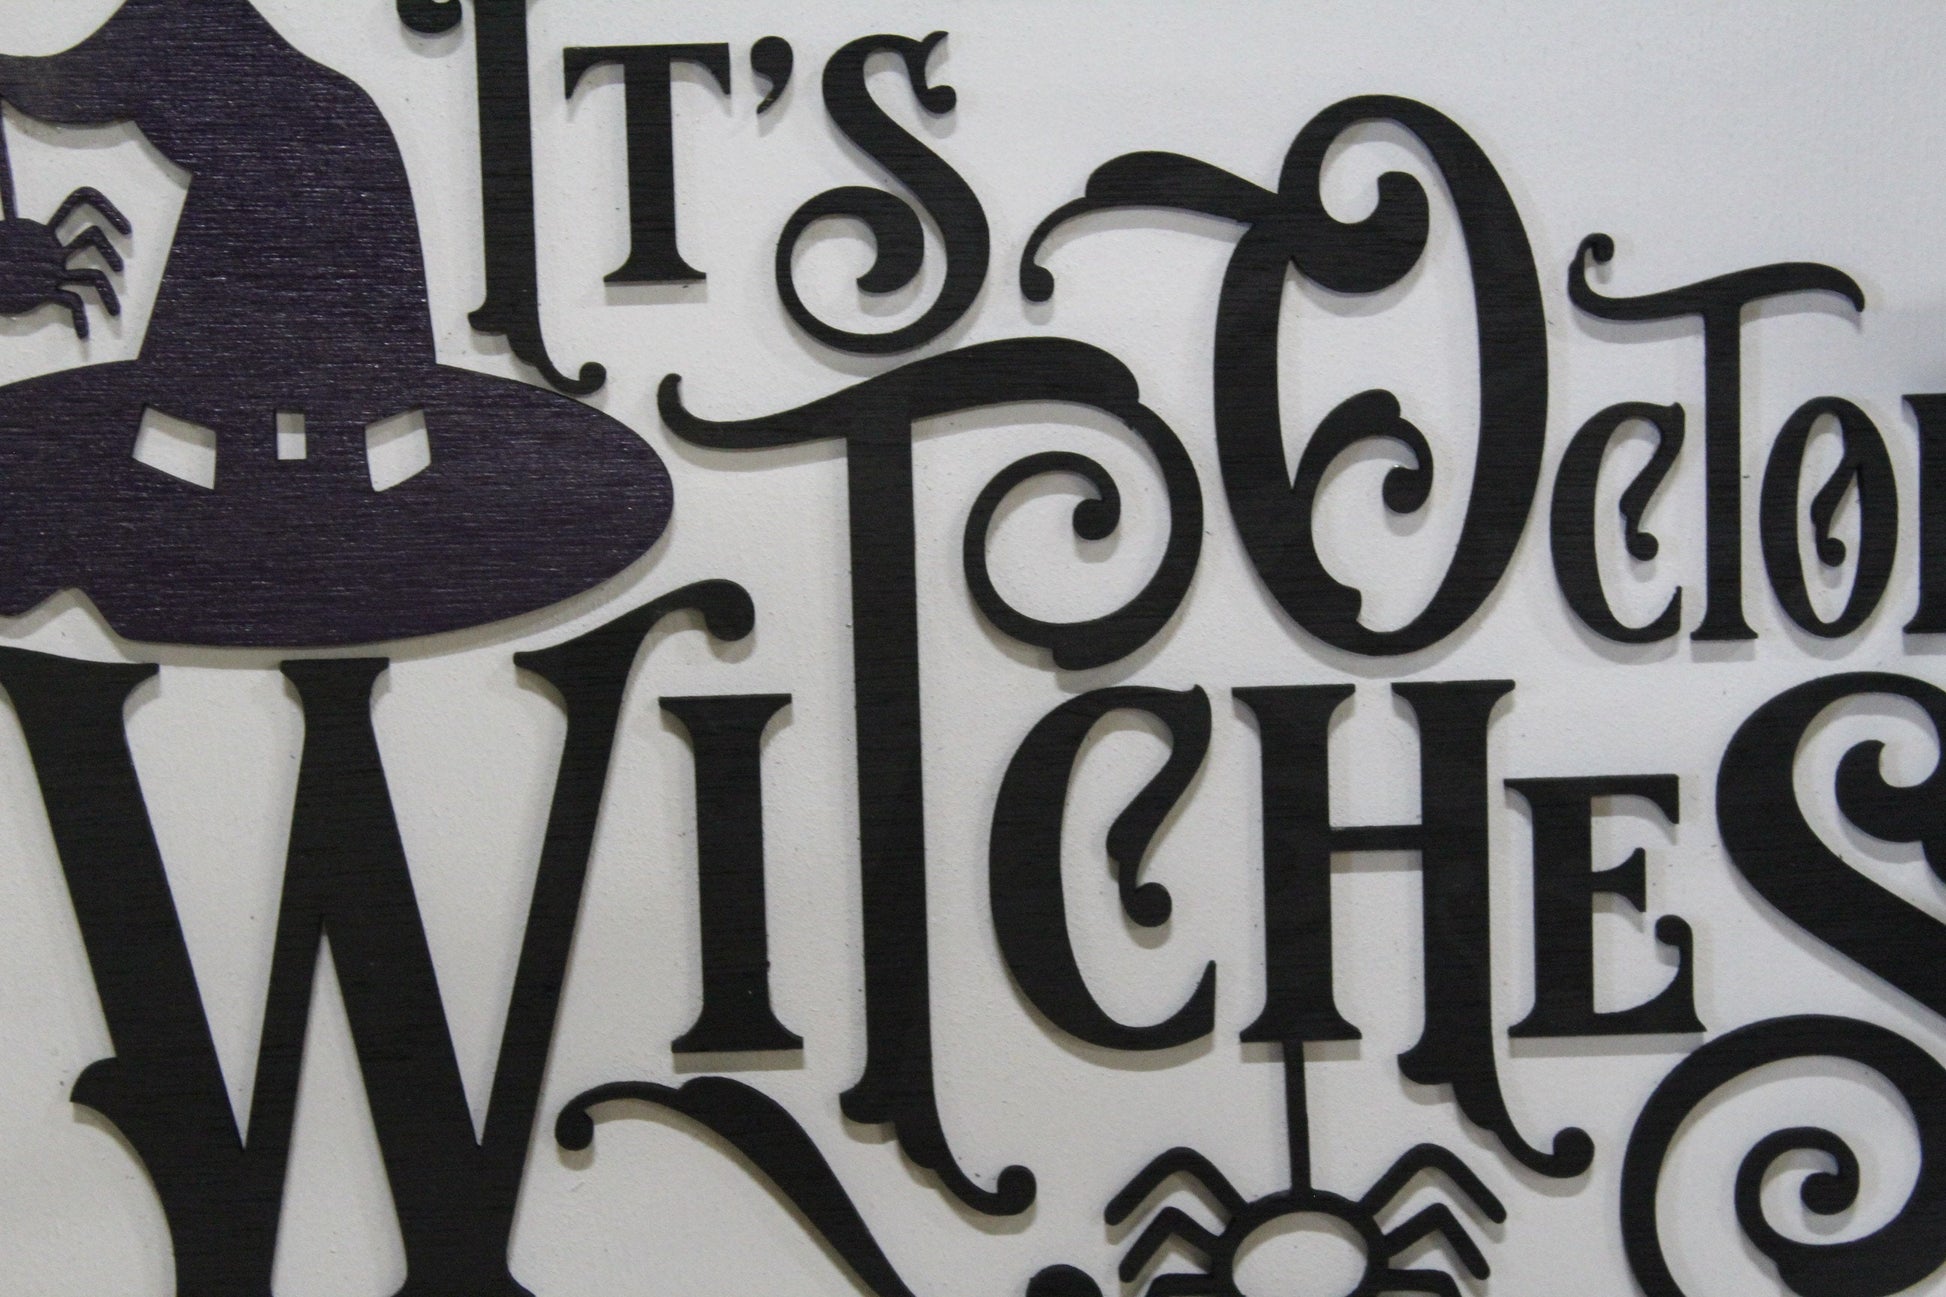 Its October Witches Hat Halloween Funny Humor Black White Wood Sign 3D Lettering Holiday Fall Autumn Small Square Handmade Classic Rustic